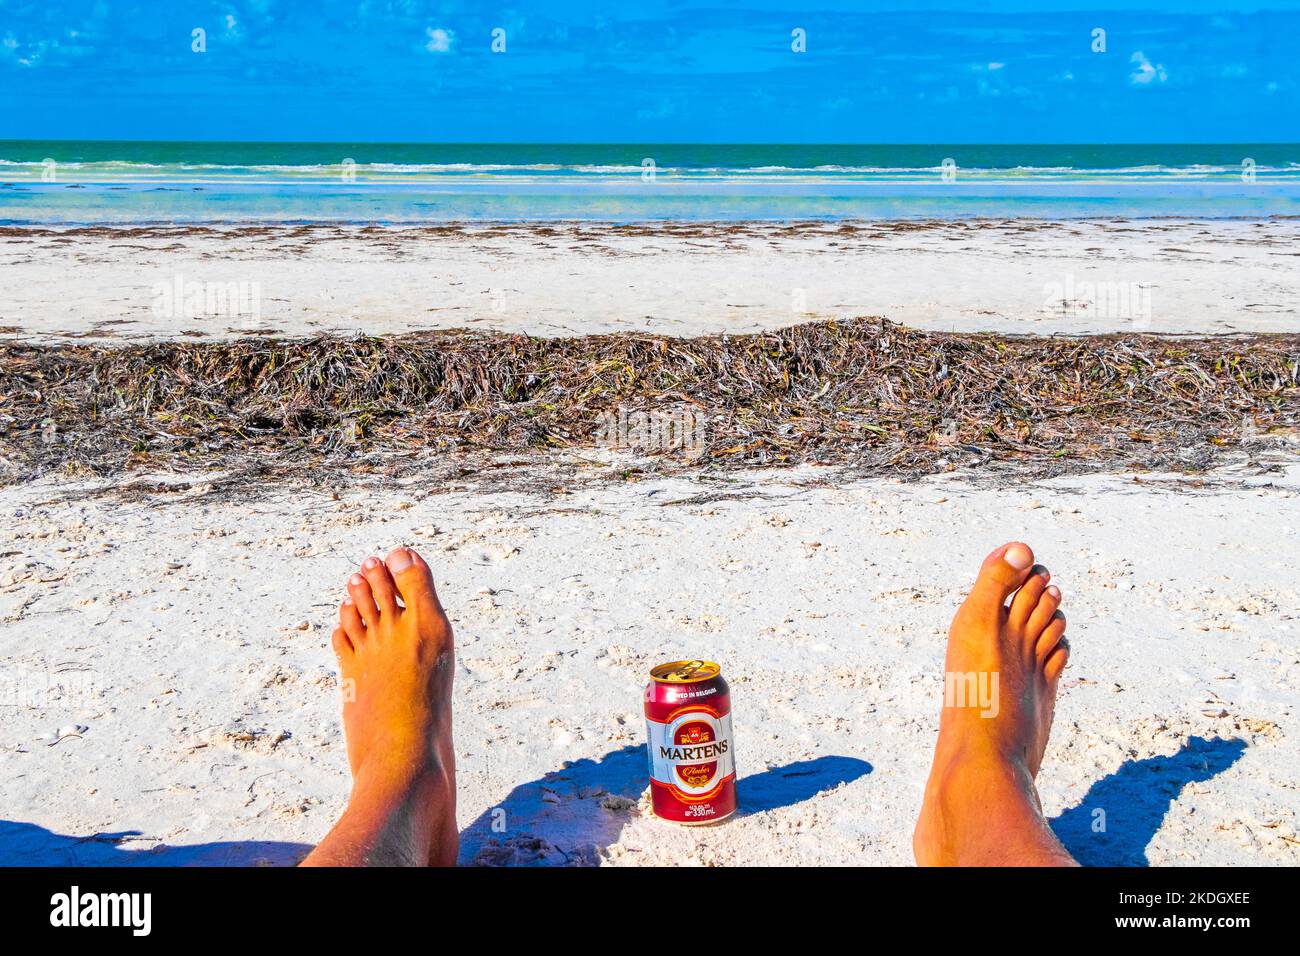 Drinking a can of cold beer Martens on the beach in paradise on Isla Holbox island in Quintana Roo Mexico. Stock Photo